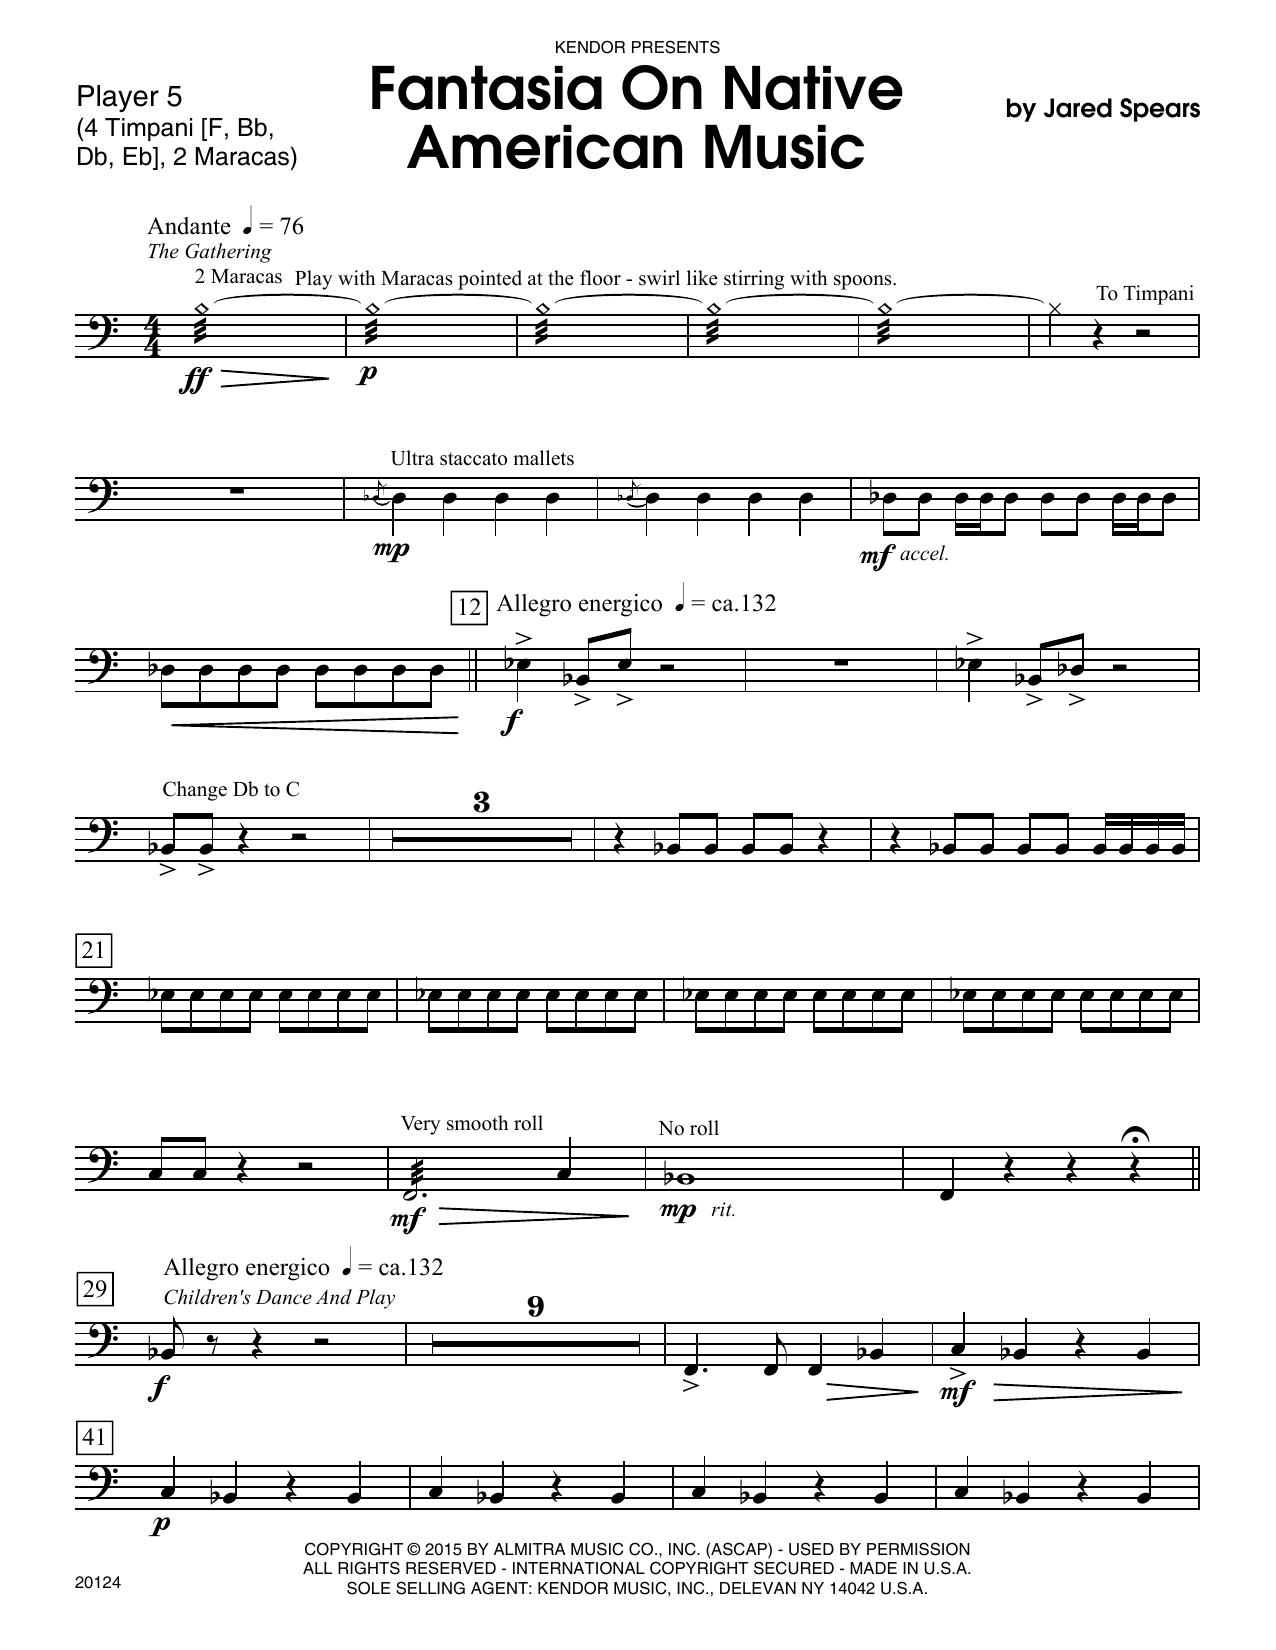 Download Jared Spears Fantasia On Native American Music - Per Sheet Music